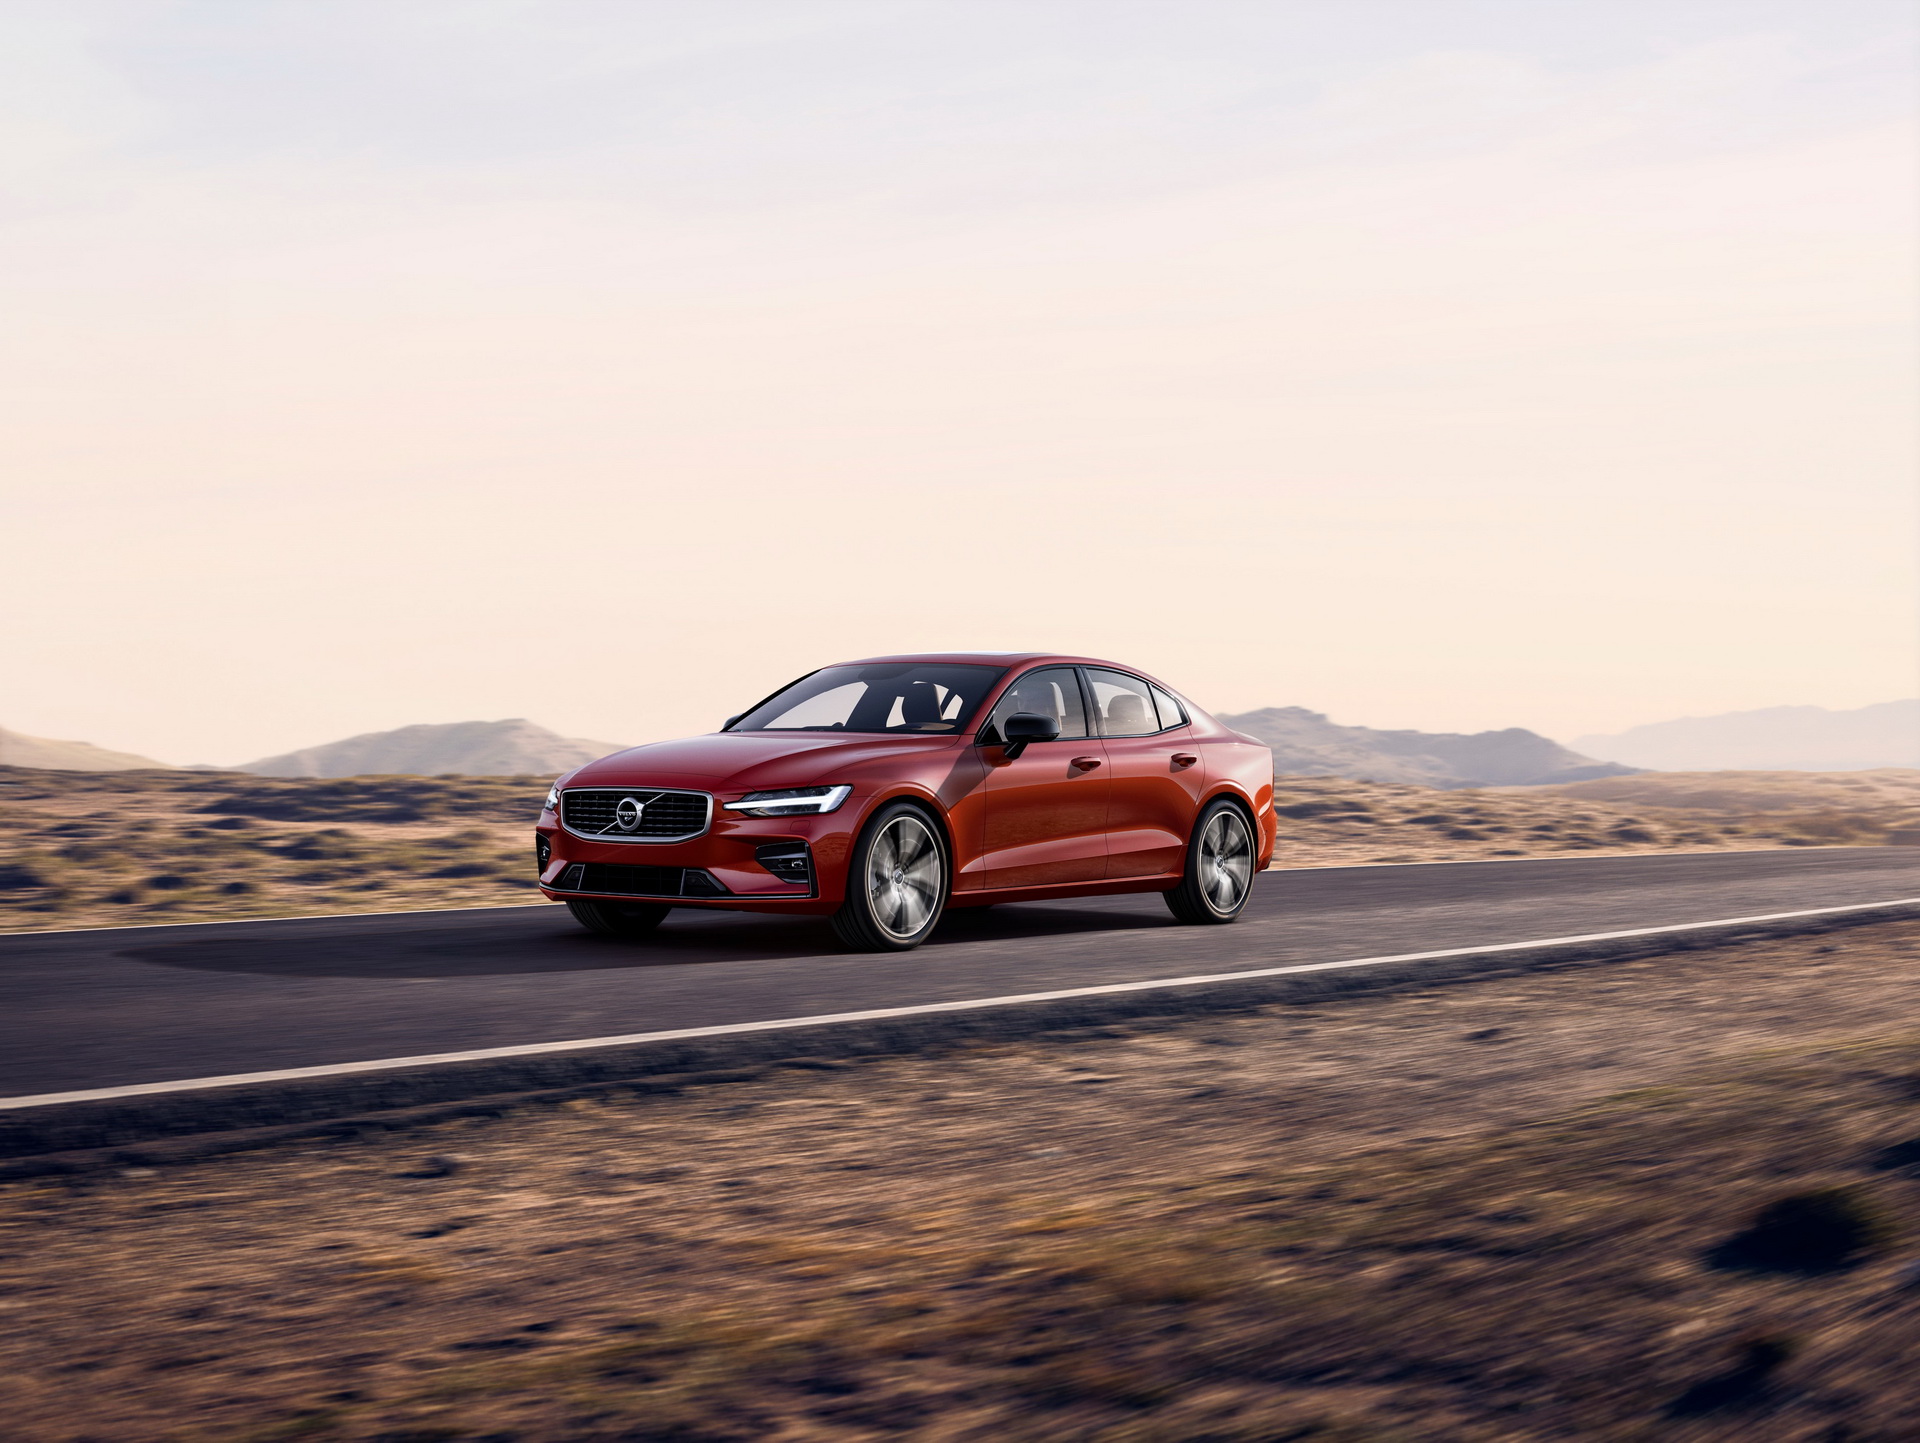 [Image: 8a35174c-2019-volvo-s60-unveiled-108.jpg]